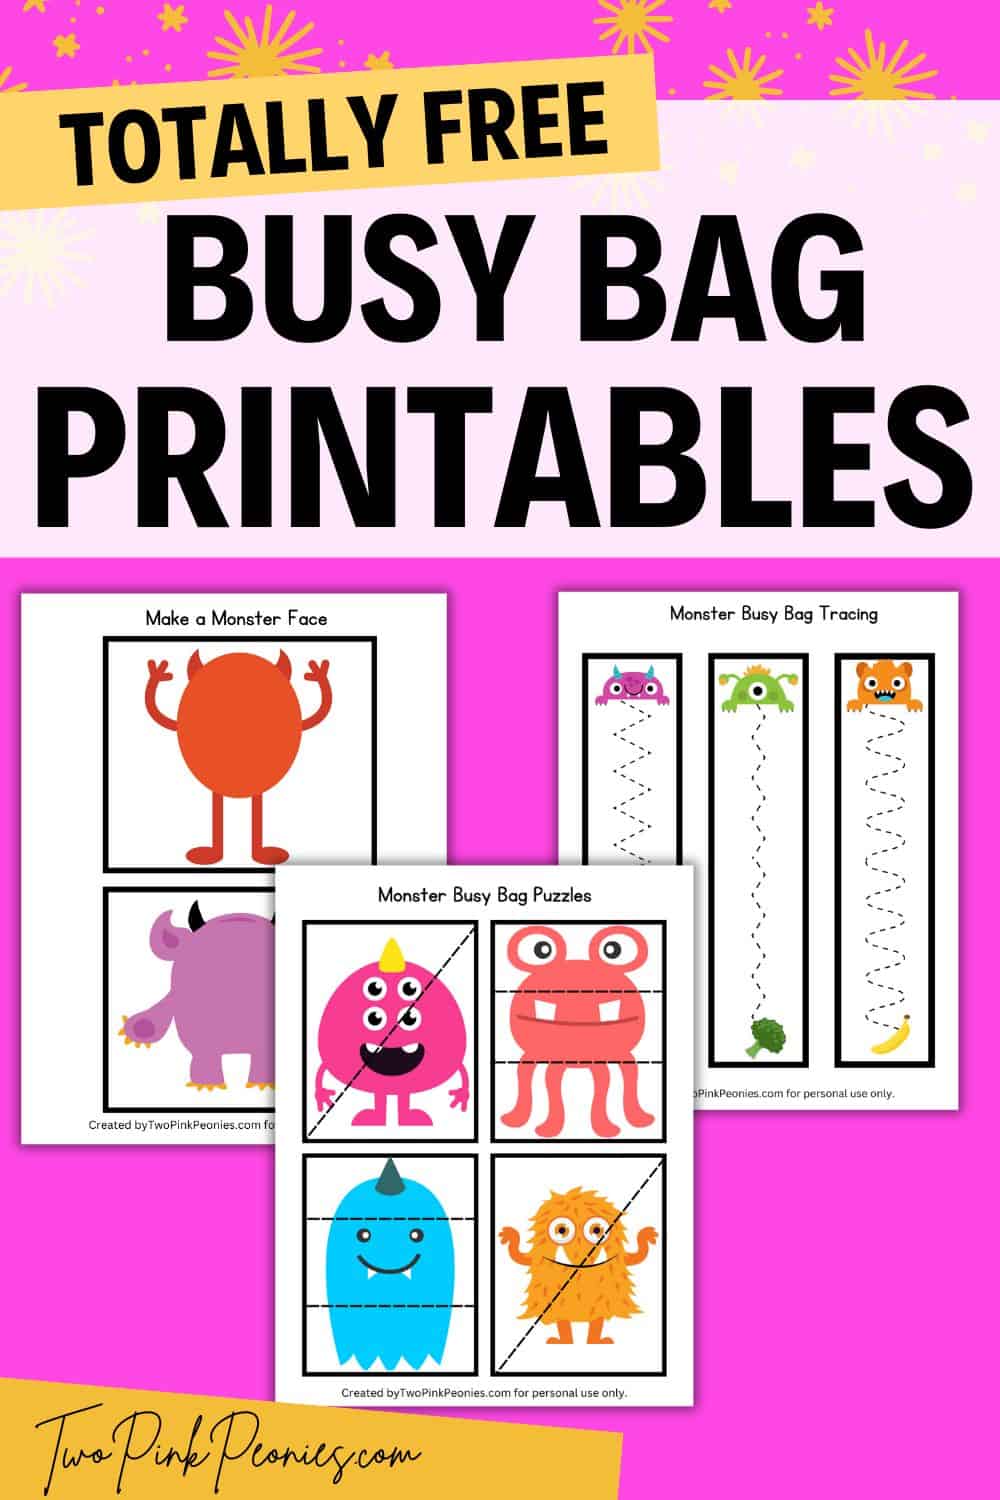 Text that says, "Totally free busy bag printables." Below the text are mock ups of some of the busy bag pages.